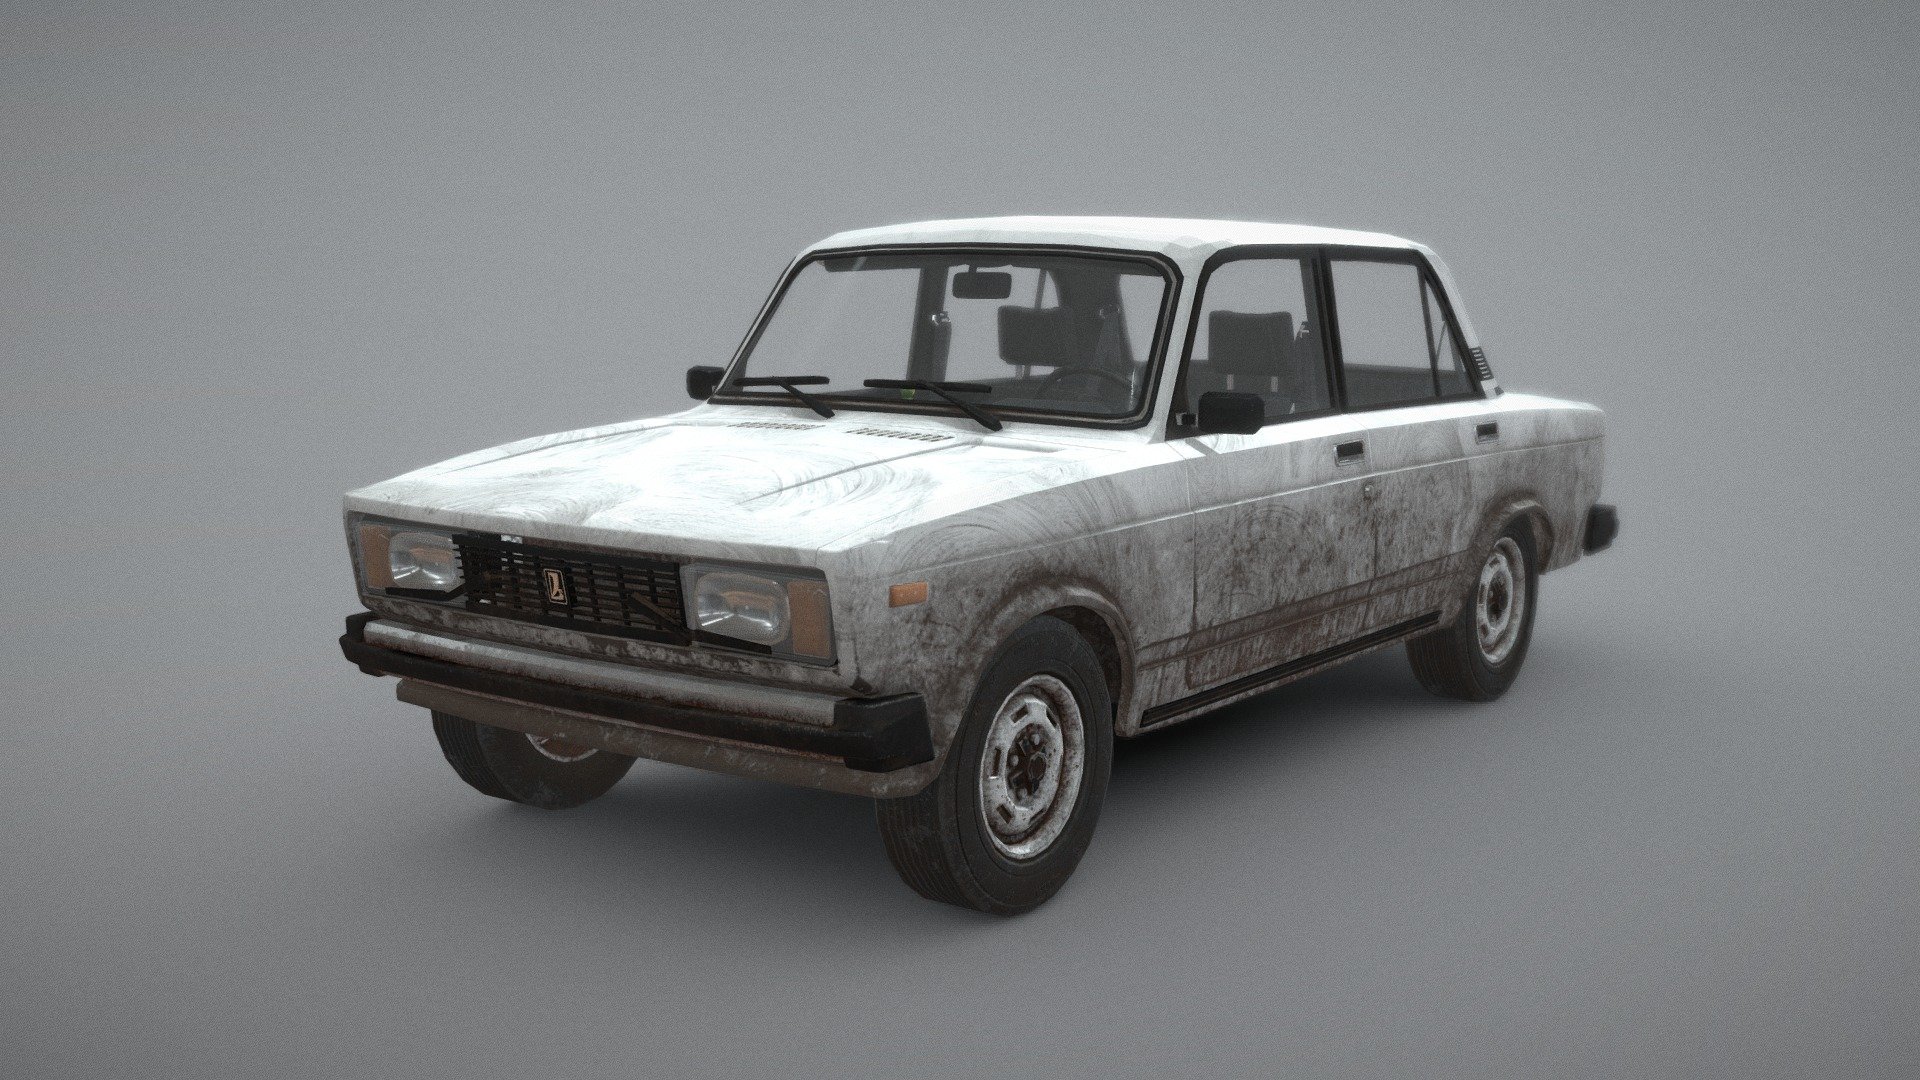 3d model of the VAZ-2105 car, first released in 1979
this model has a fully developed interior and engine compartment with engine and other units, this model also has a well-designed suspension
the model is completely made according to the original drawings of the AVTOVAZ concern, including the body, interior, engine, suspension and other units - VAZ-2105 - Download Free 3D model by matthew0451 3d model